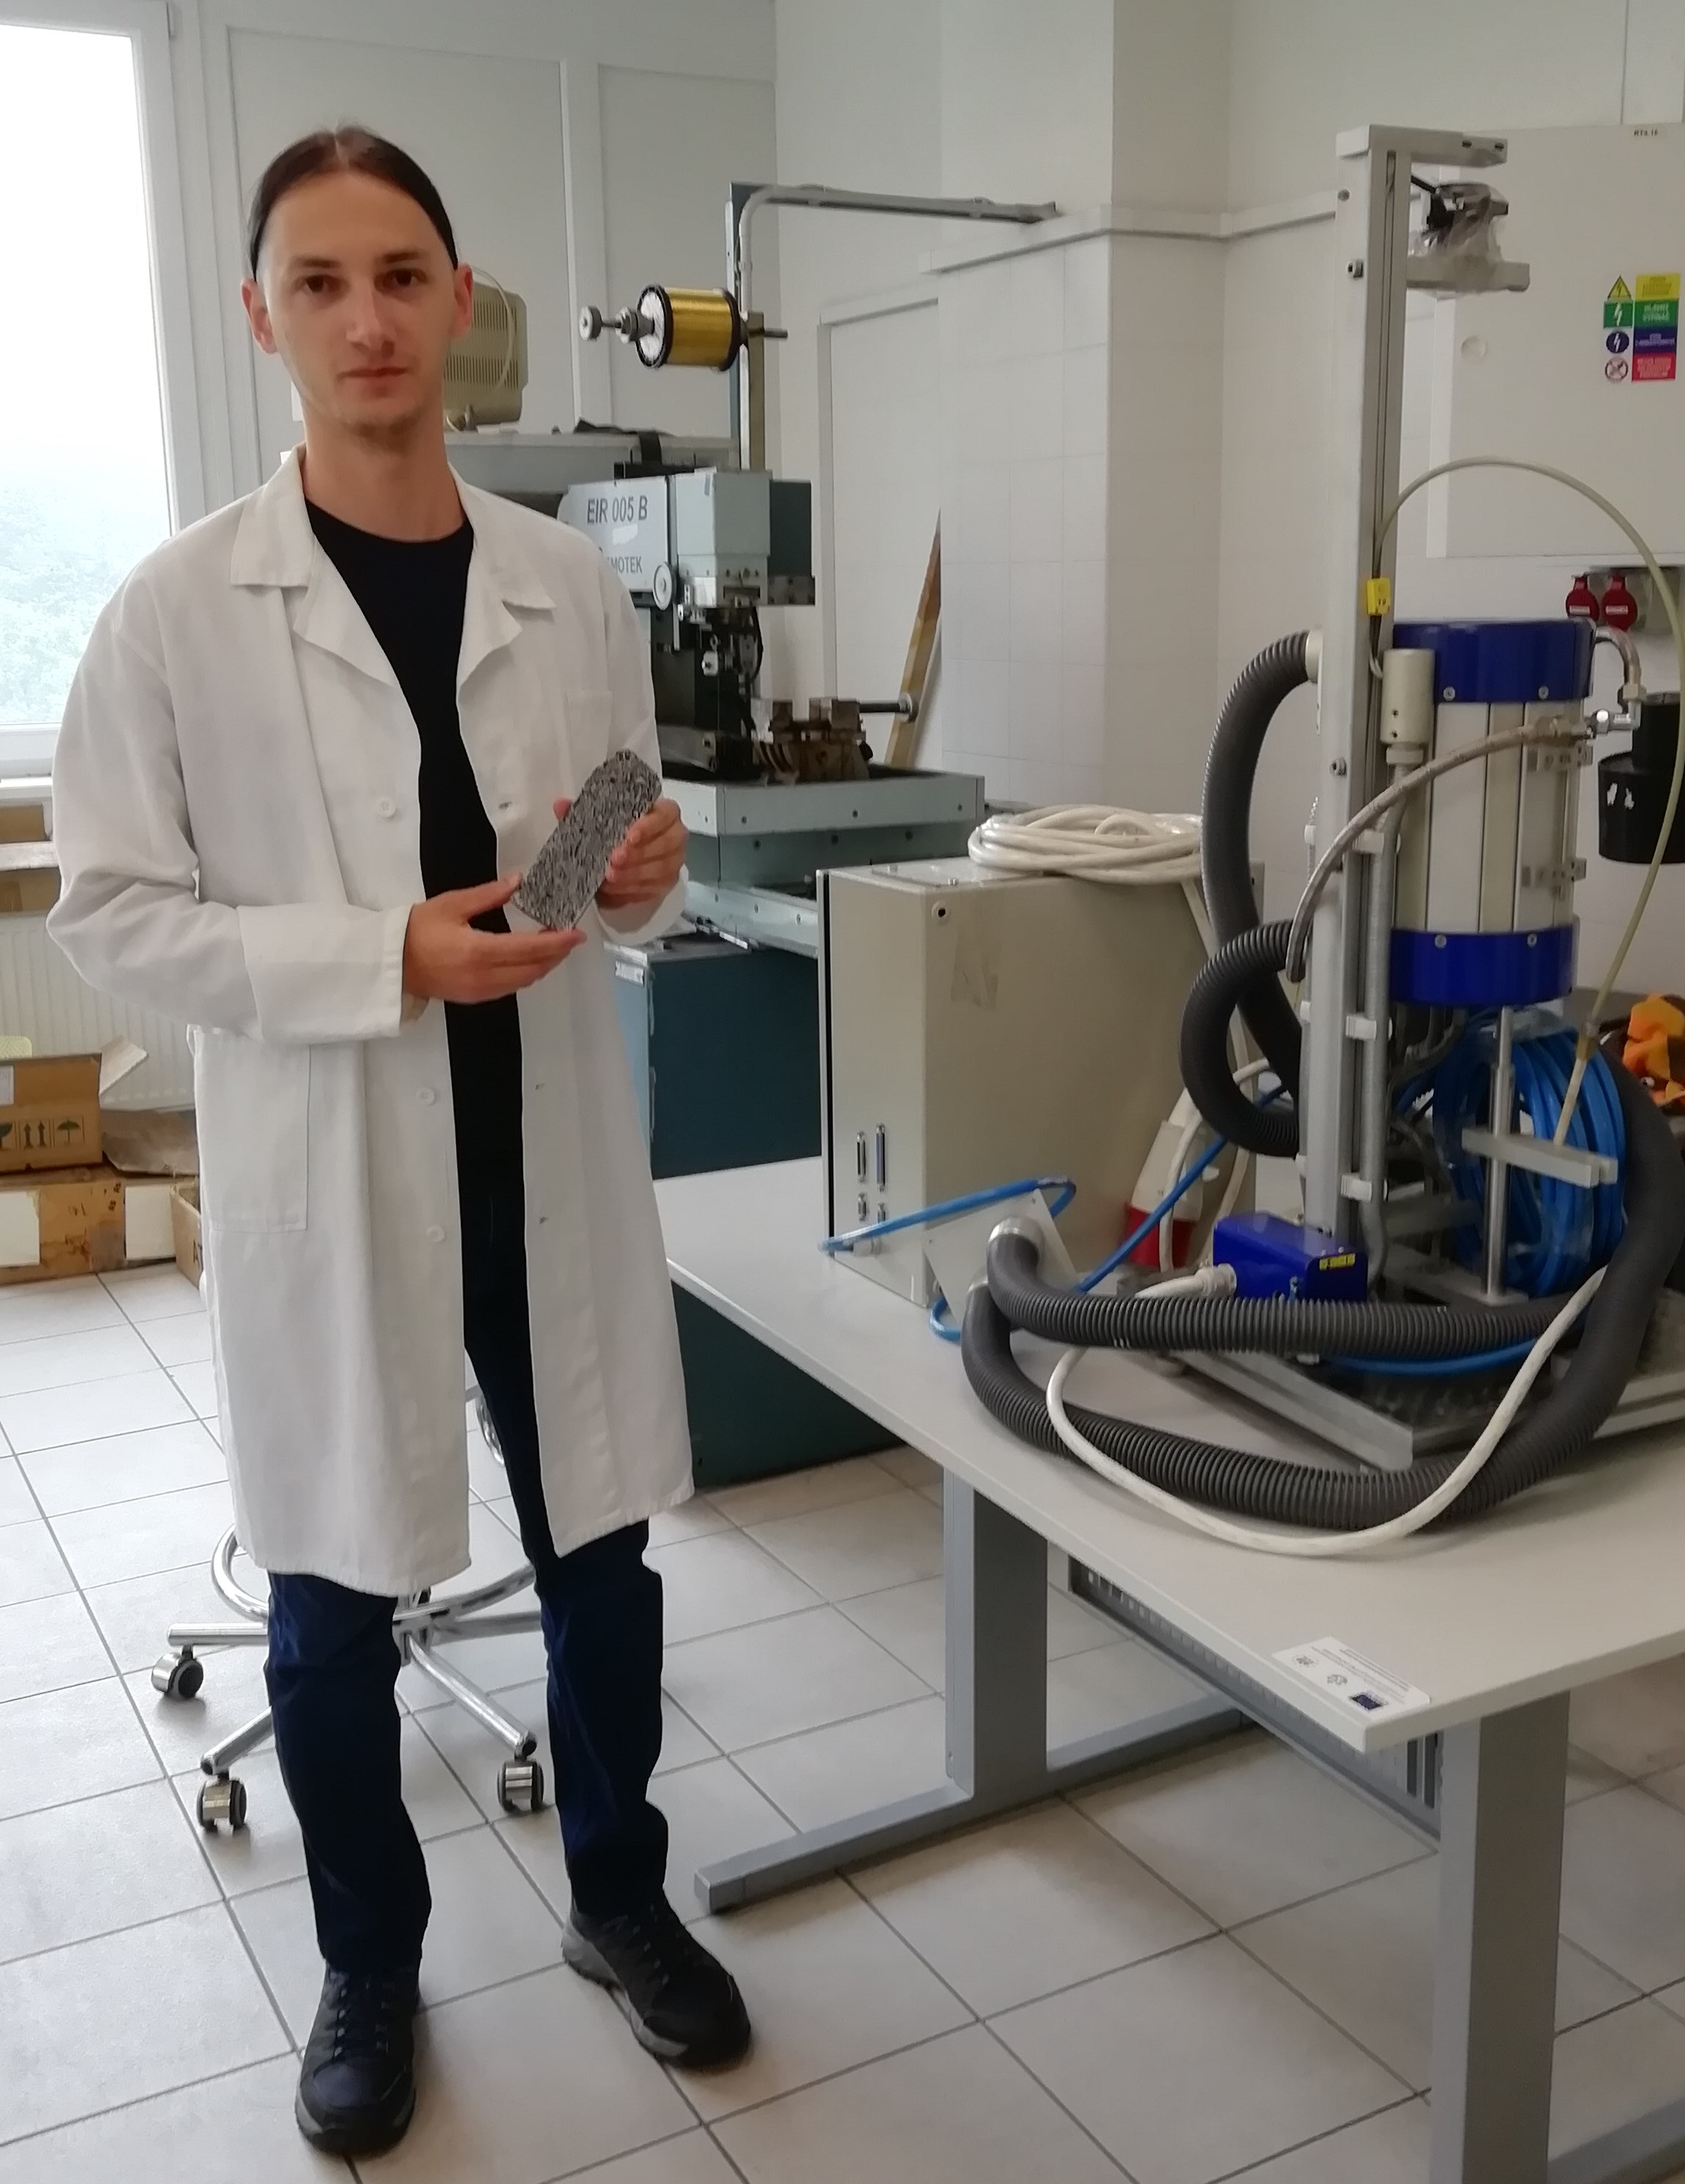 A scholarship holder from Croatia researches aluminum foams at IMMM SAS